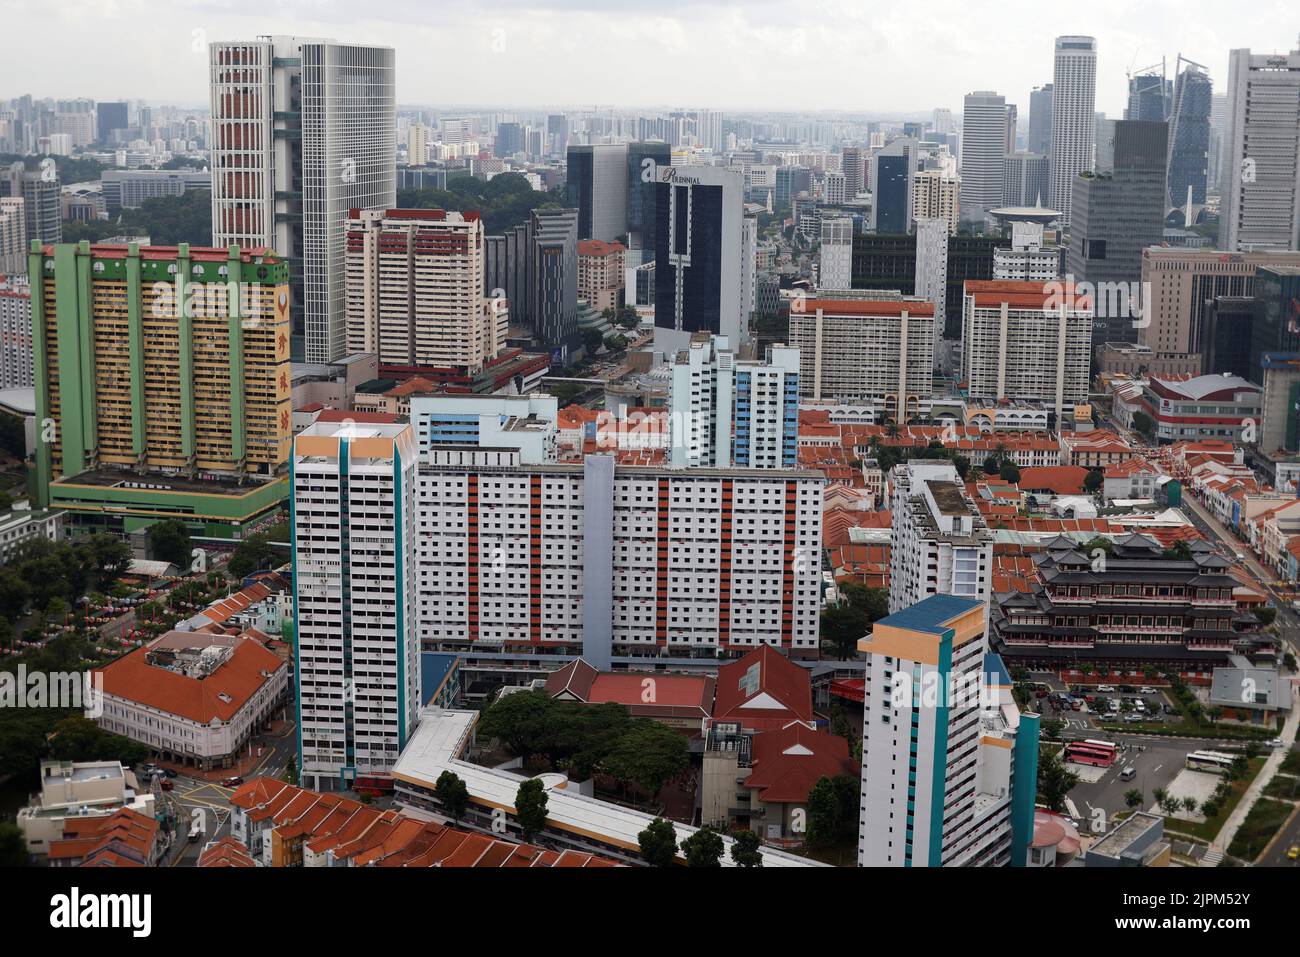 A view of old public housing apartments in fringe of the central business district in Singapore August 19, 2022. REUTERS/Edgar Su Stock Photo